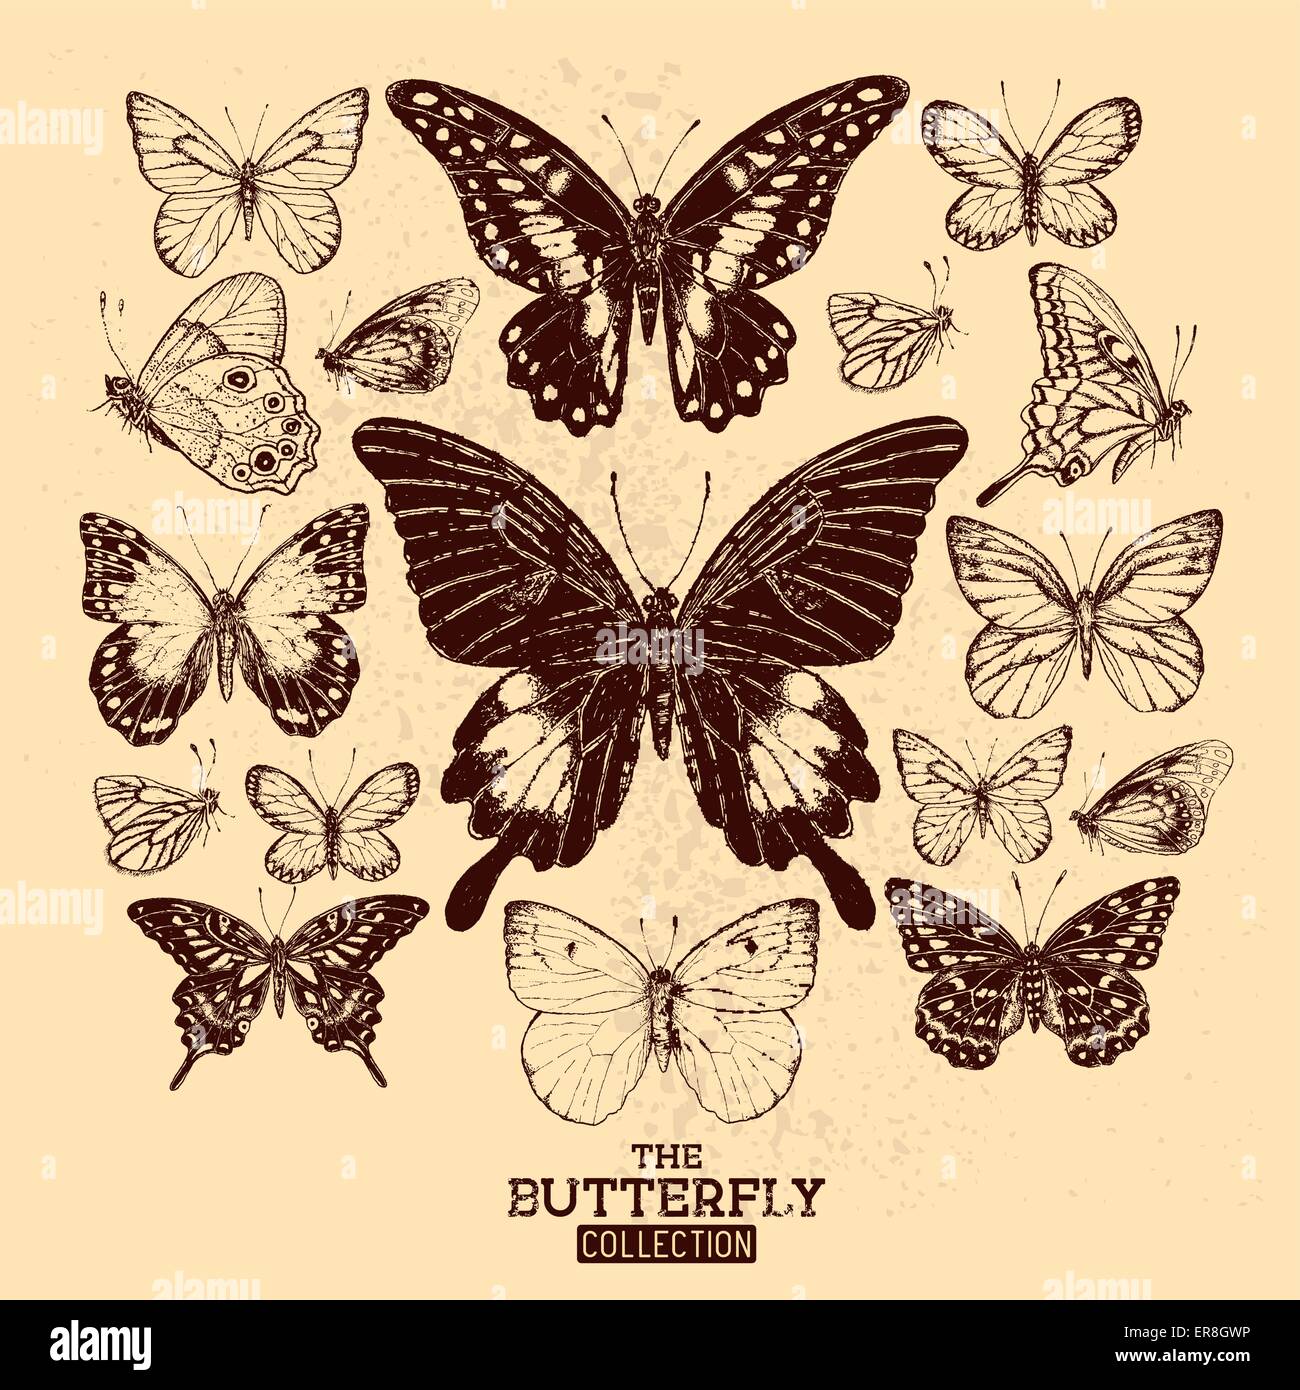 The Butterfly Collection. A collection of hand drawn butterflies, vintage set. Vector illustration. Stock Vector